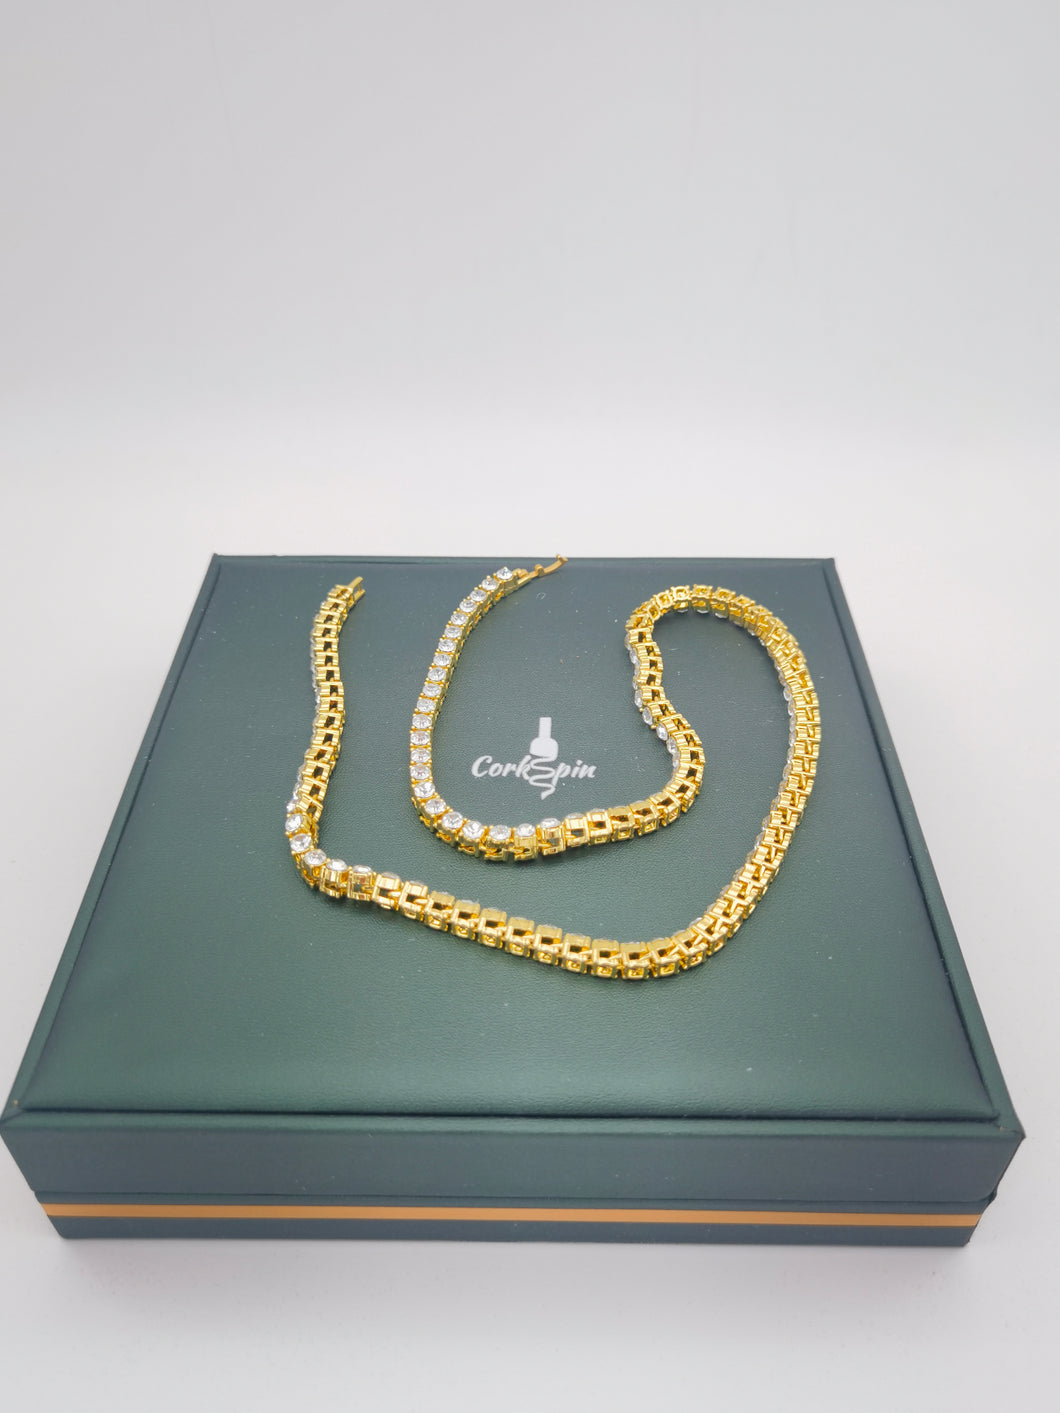 Gold Diamond Cut Chains For Men Women  Hip Hop Jewelry with Gift Box